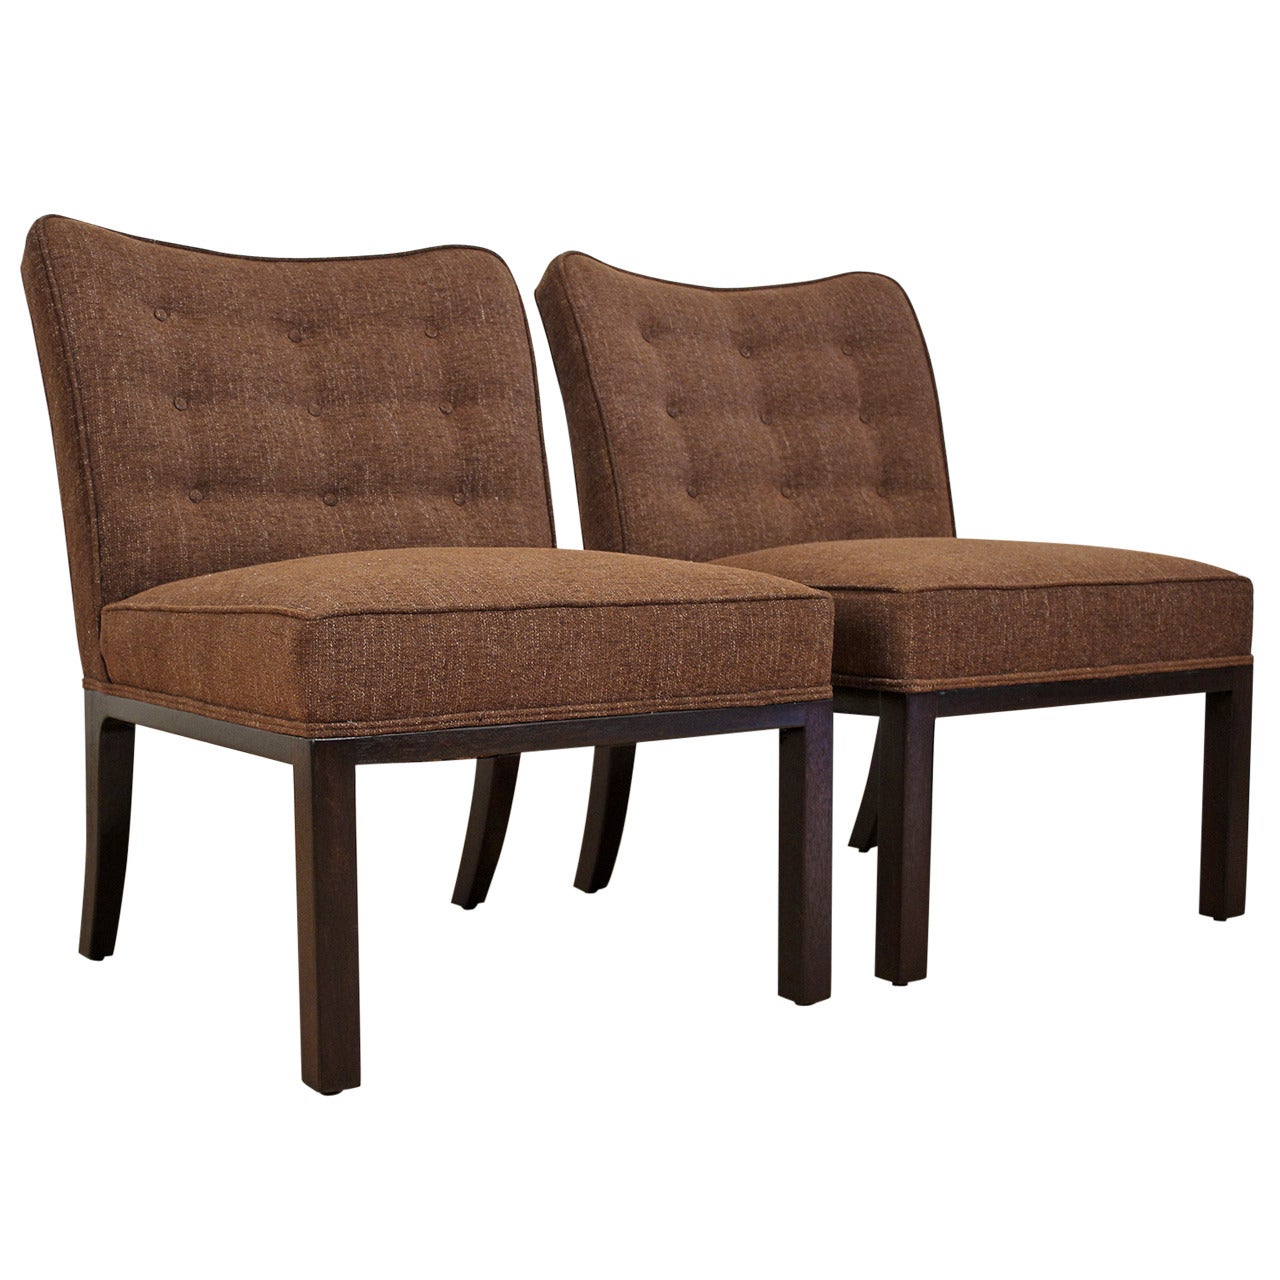 Wormley for Dunbar Pair of Chairs